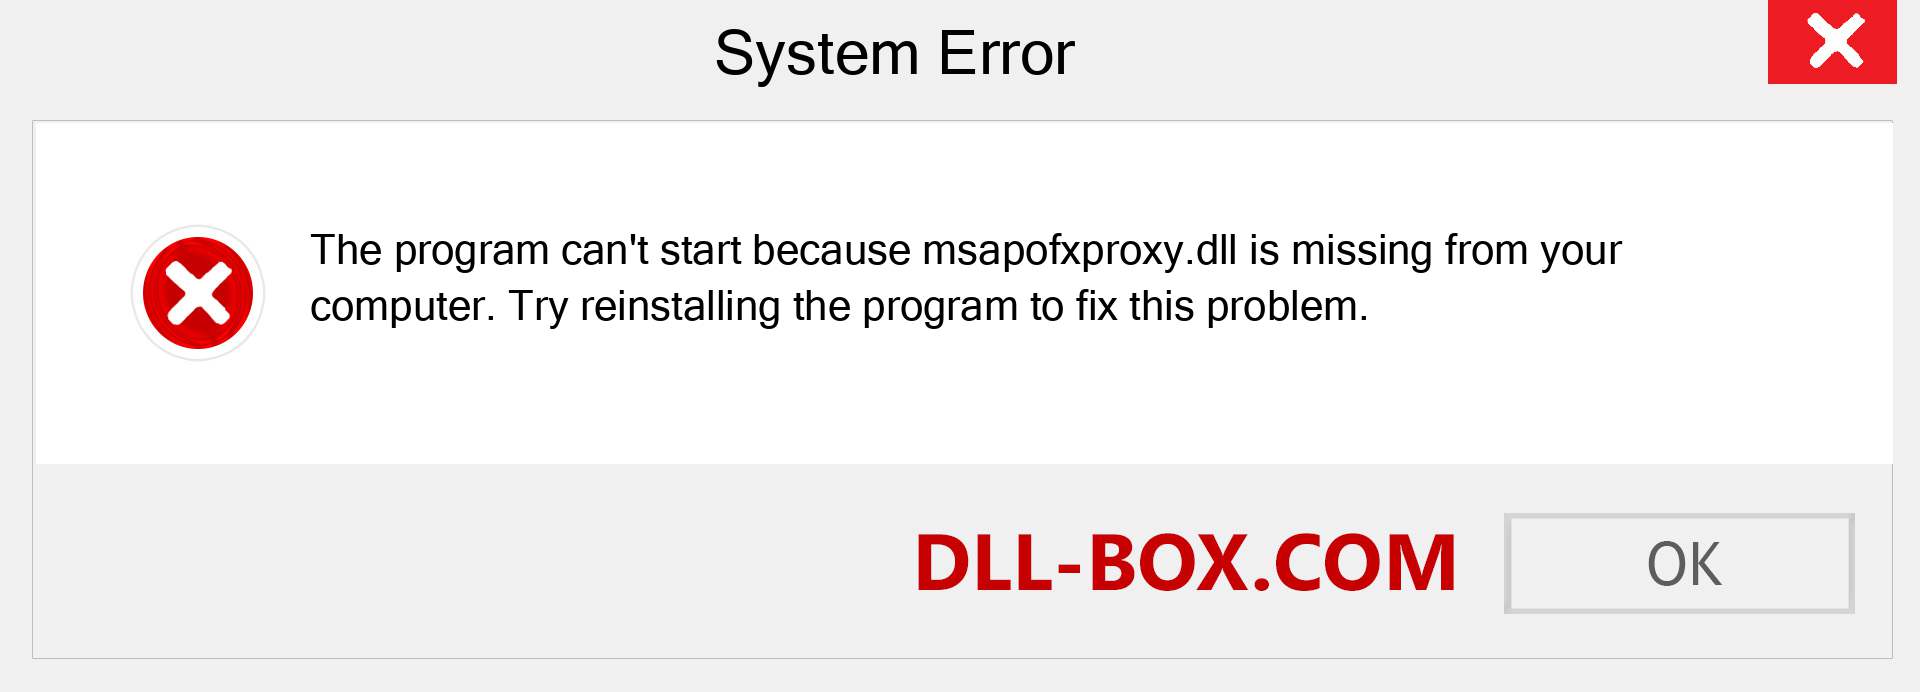  msapofxproxy.dll file is missing?. Download for Windows 7, 8, 10 - Fix  msapofxproxy dll Missing Error on Windows, photos, images